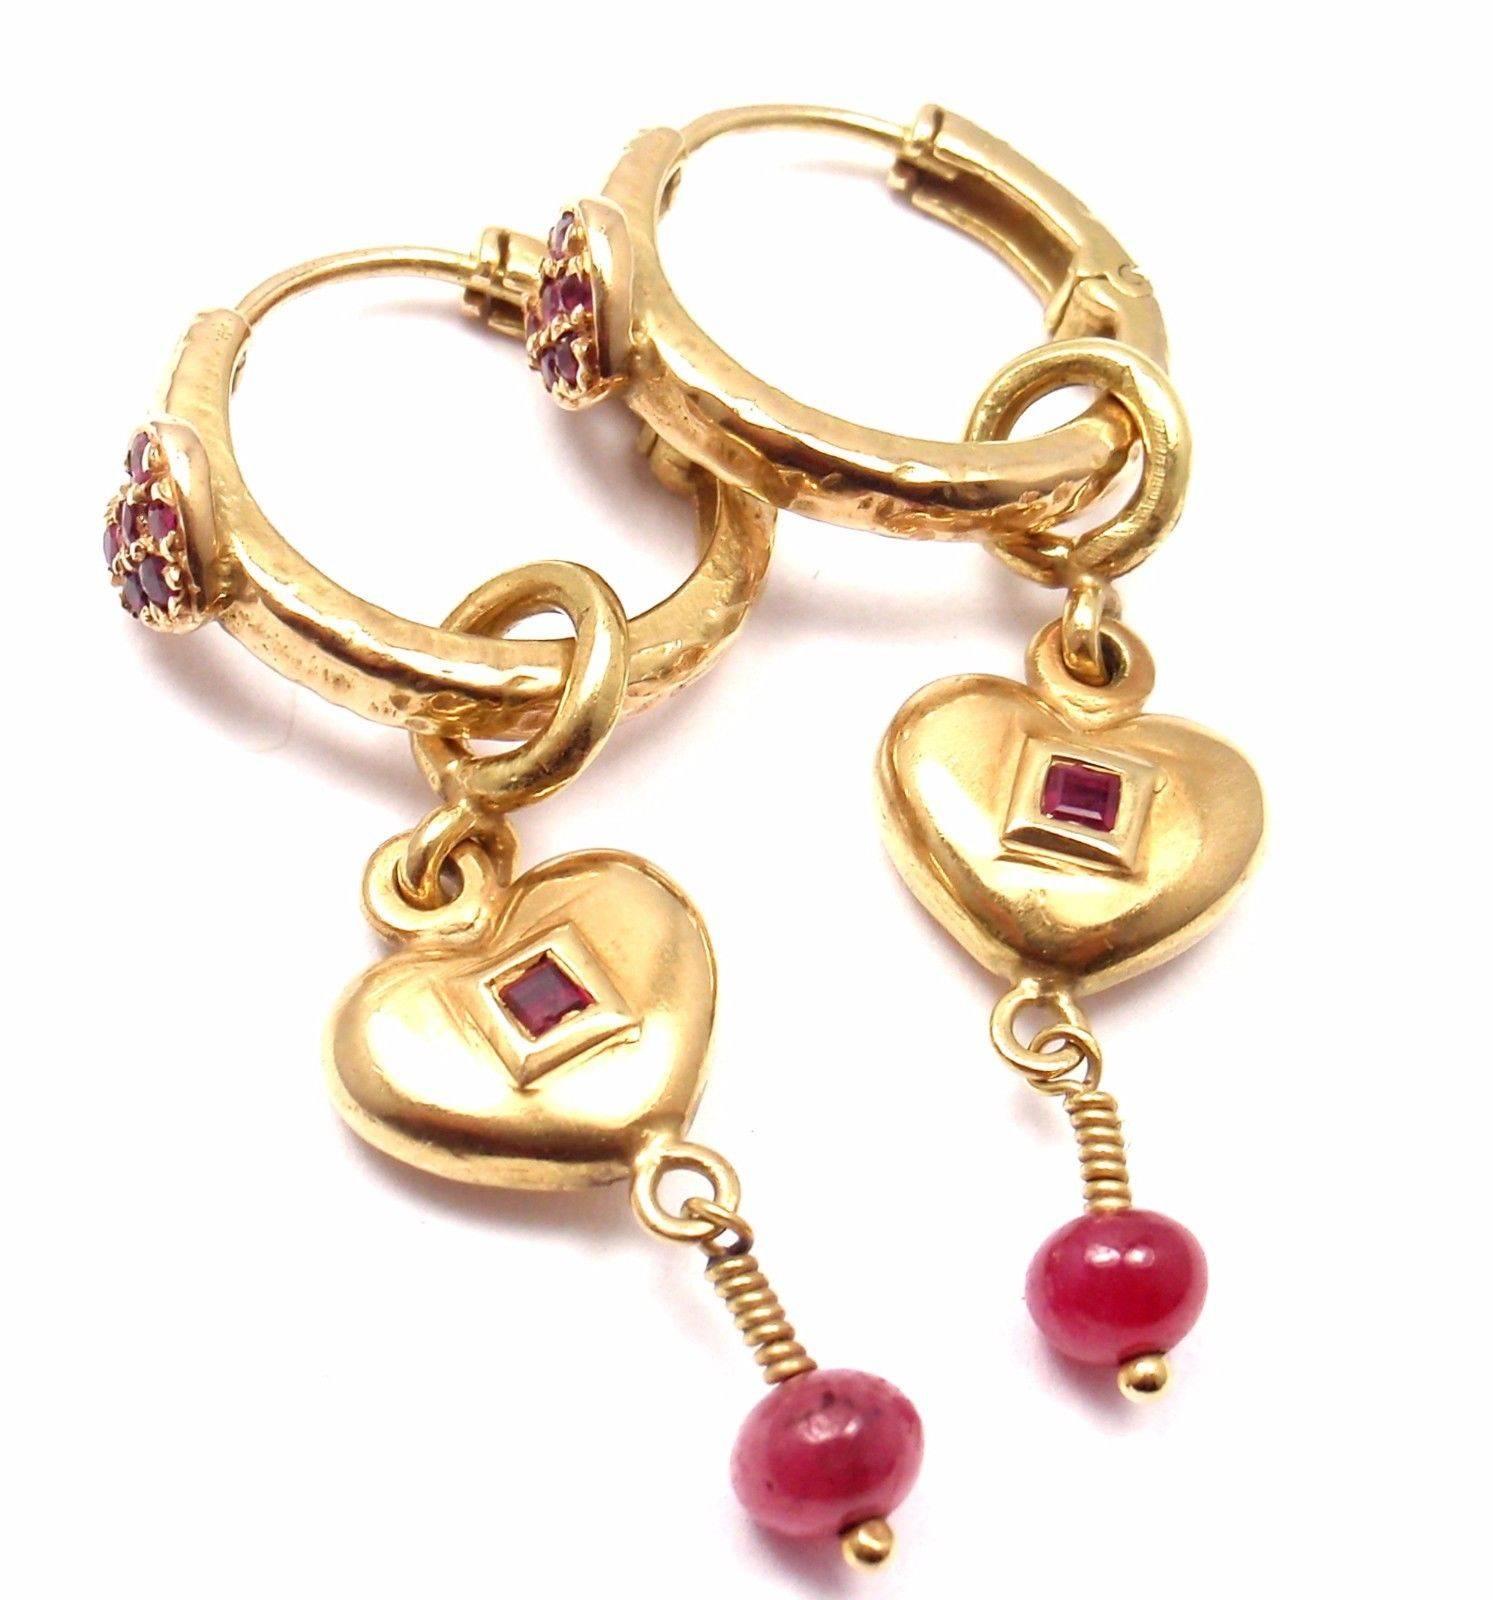 18k Yellow Gold Ruby Heart Enhancers Hoop Earrings by Loree Rodkin. 
With 14 round rubies

Details: 
Measurements: 42mm x 16mm
Weight: 11.4 grams
Stamped Hallmarks:  LR 18k

*Free Shipping within the United States*

YOUR PRICE: